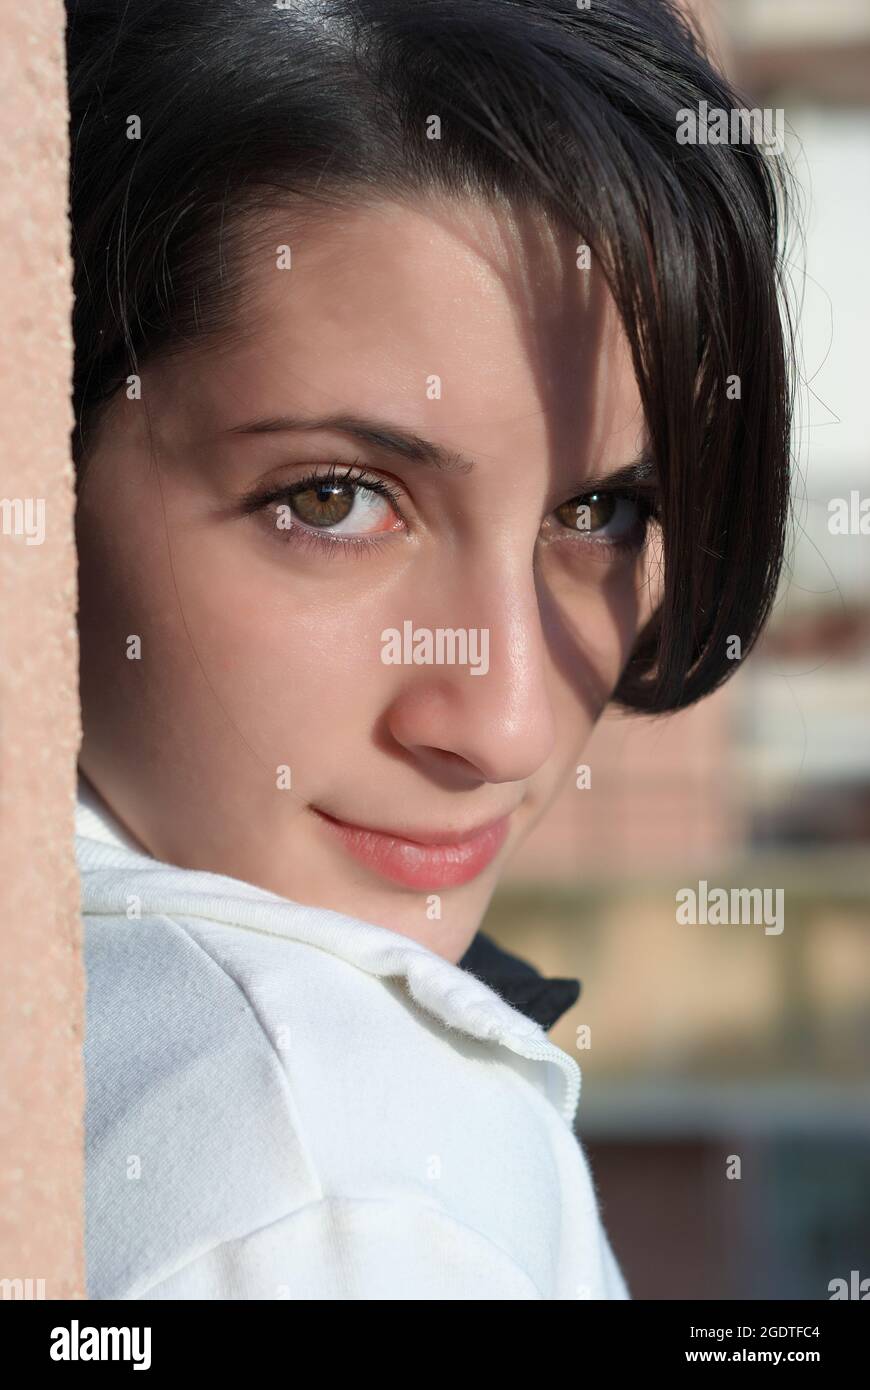 close up portrait of smiling girl face eyes who are looking at the camera Stock Photo